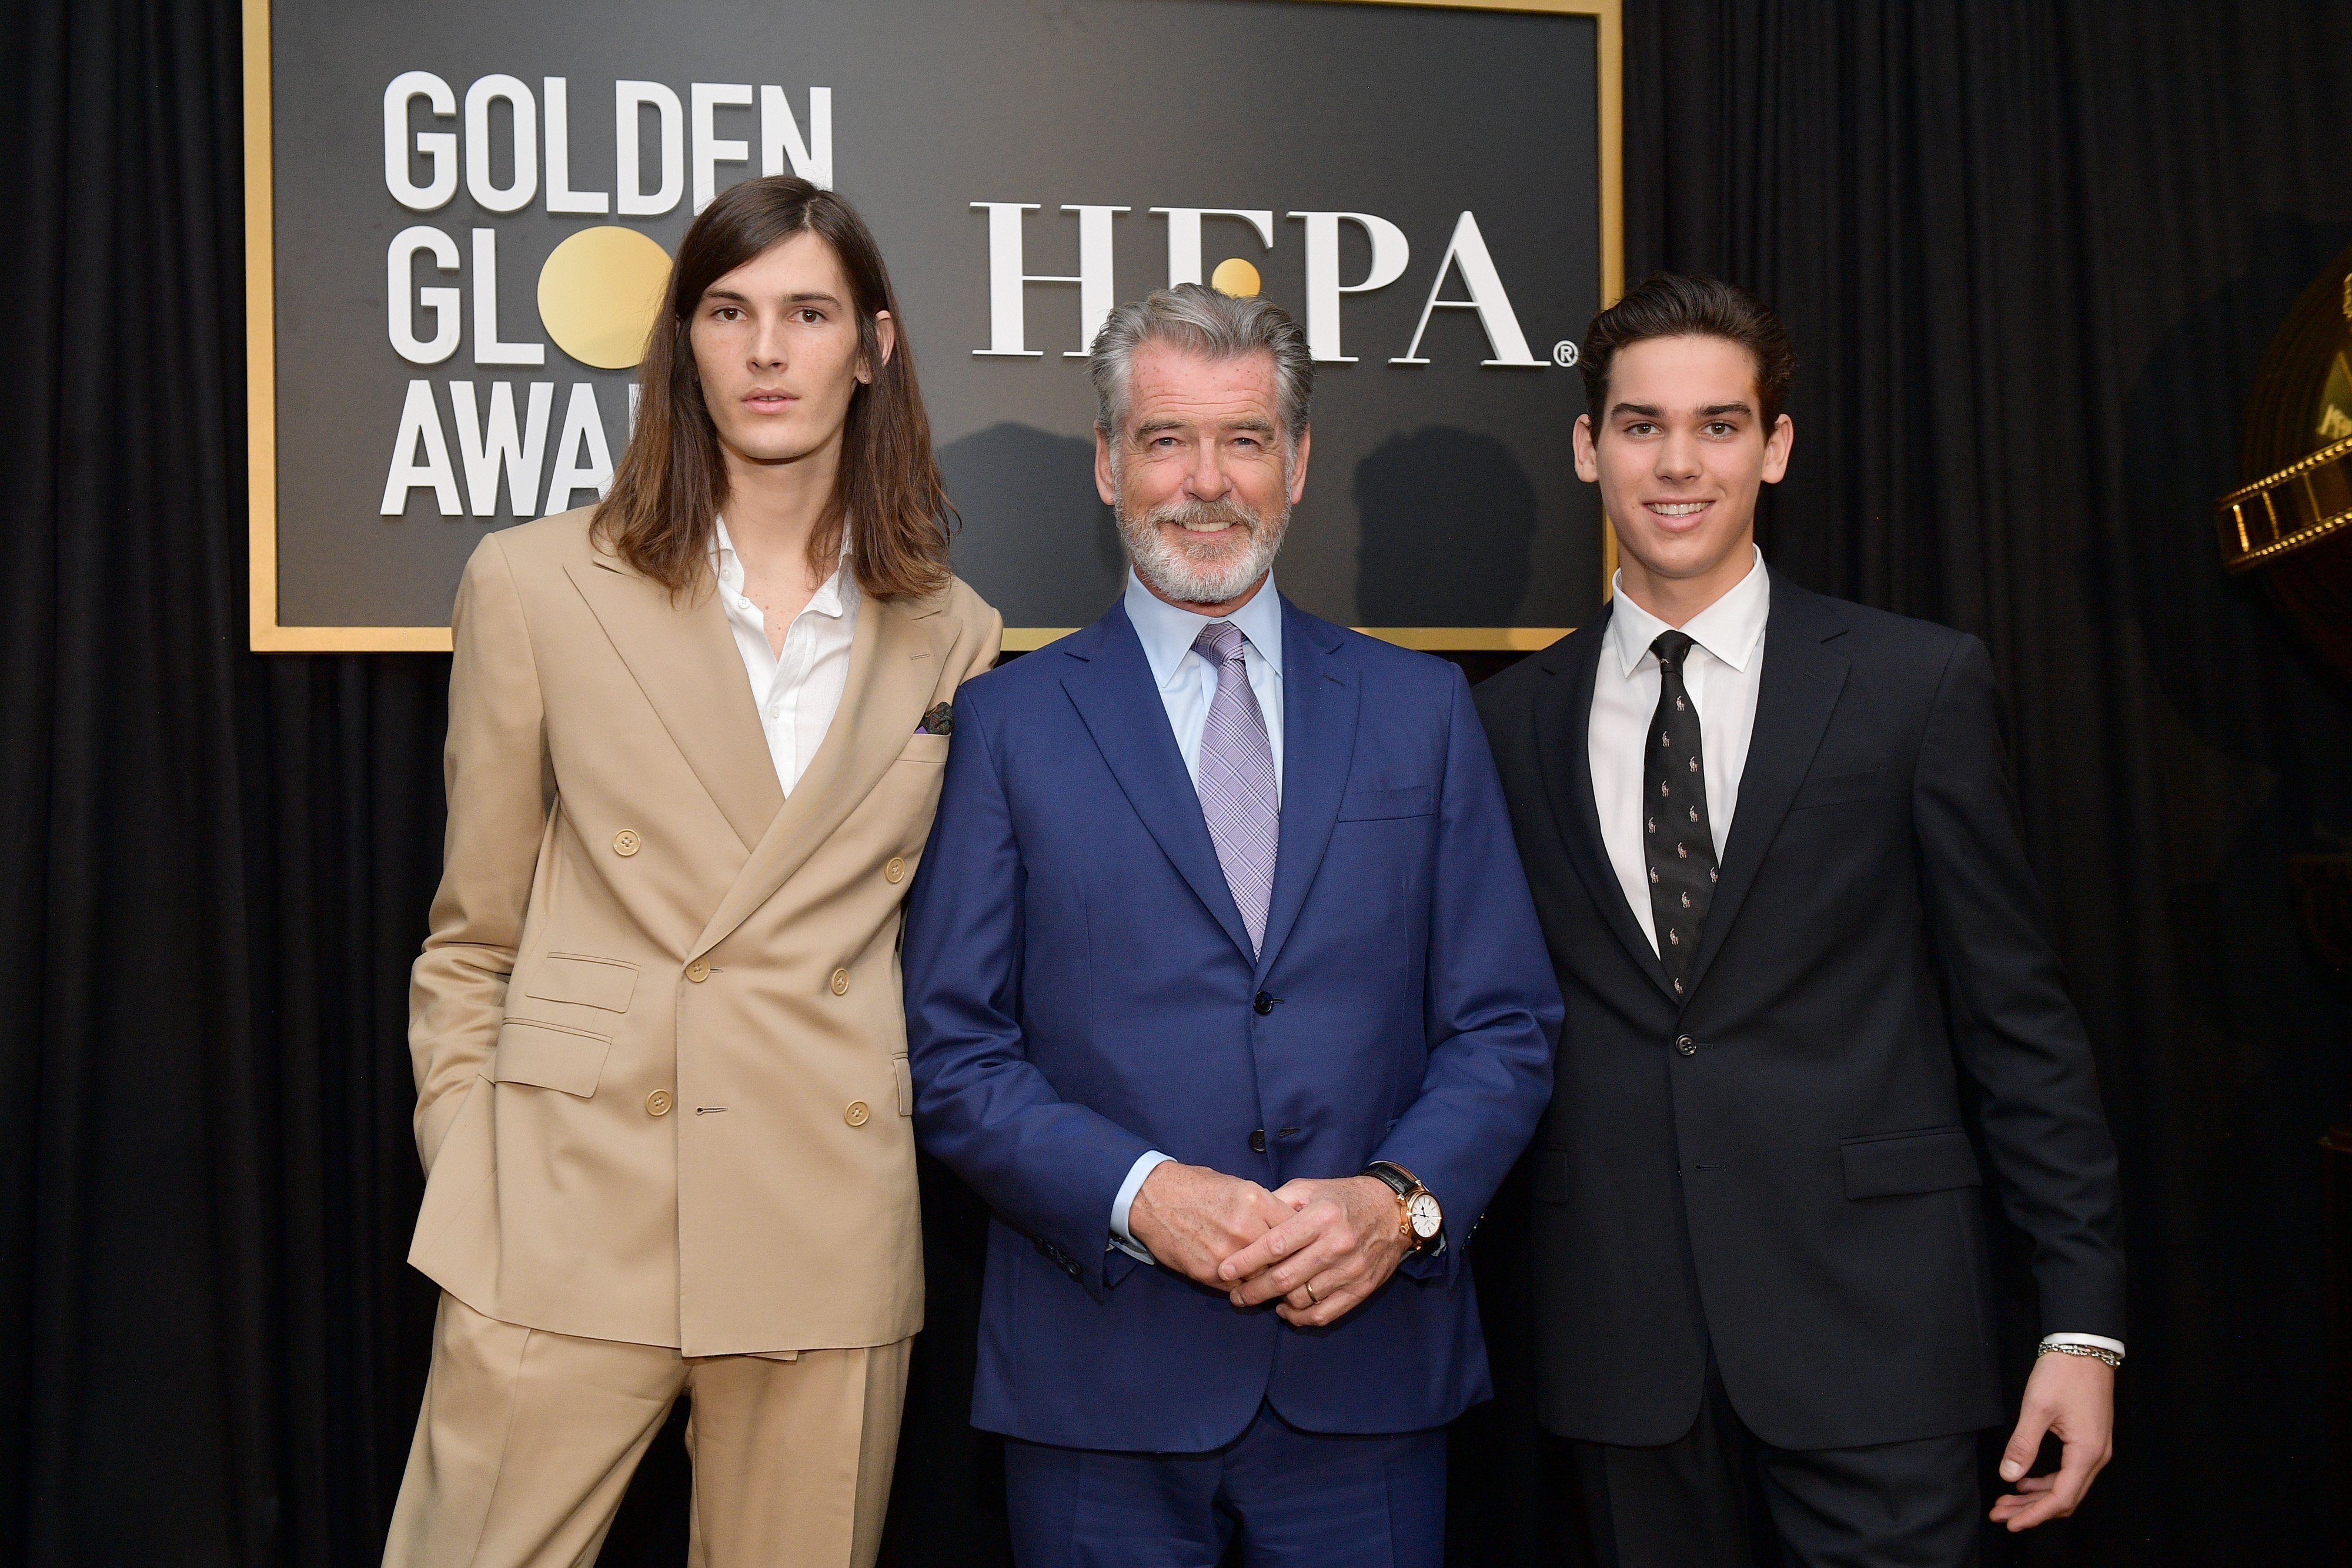 Pierce Brosnan (C) poses with Golden Globe Ambassadors Dylan Brosnan (L) and Paris Brosnan onstage during the Hollywood Foreign Press Association and The Hollywood Reporter Celebration of the 2020 Golden Globe Awards Season. | Source: Getty Images.